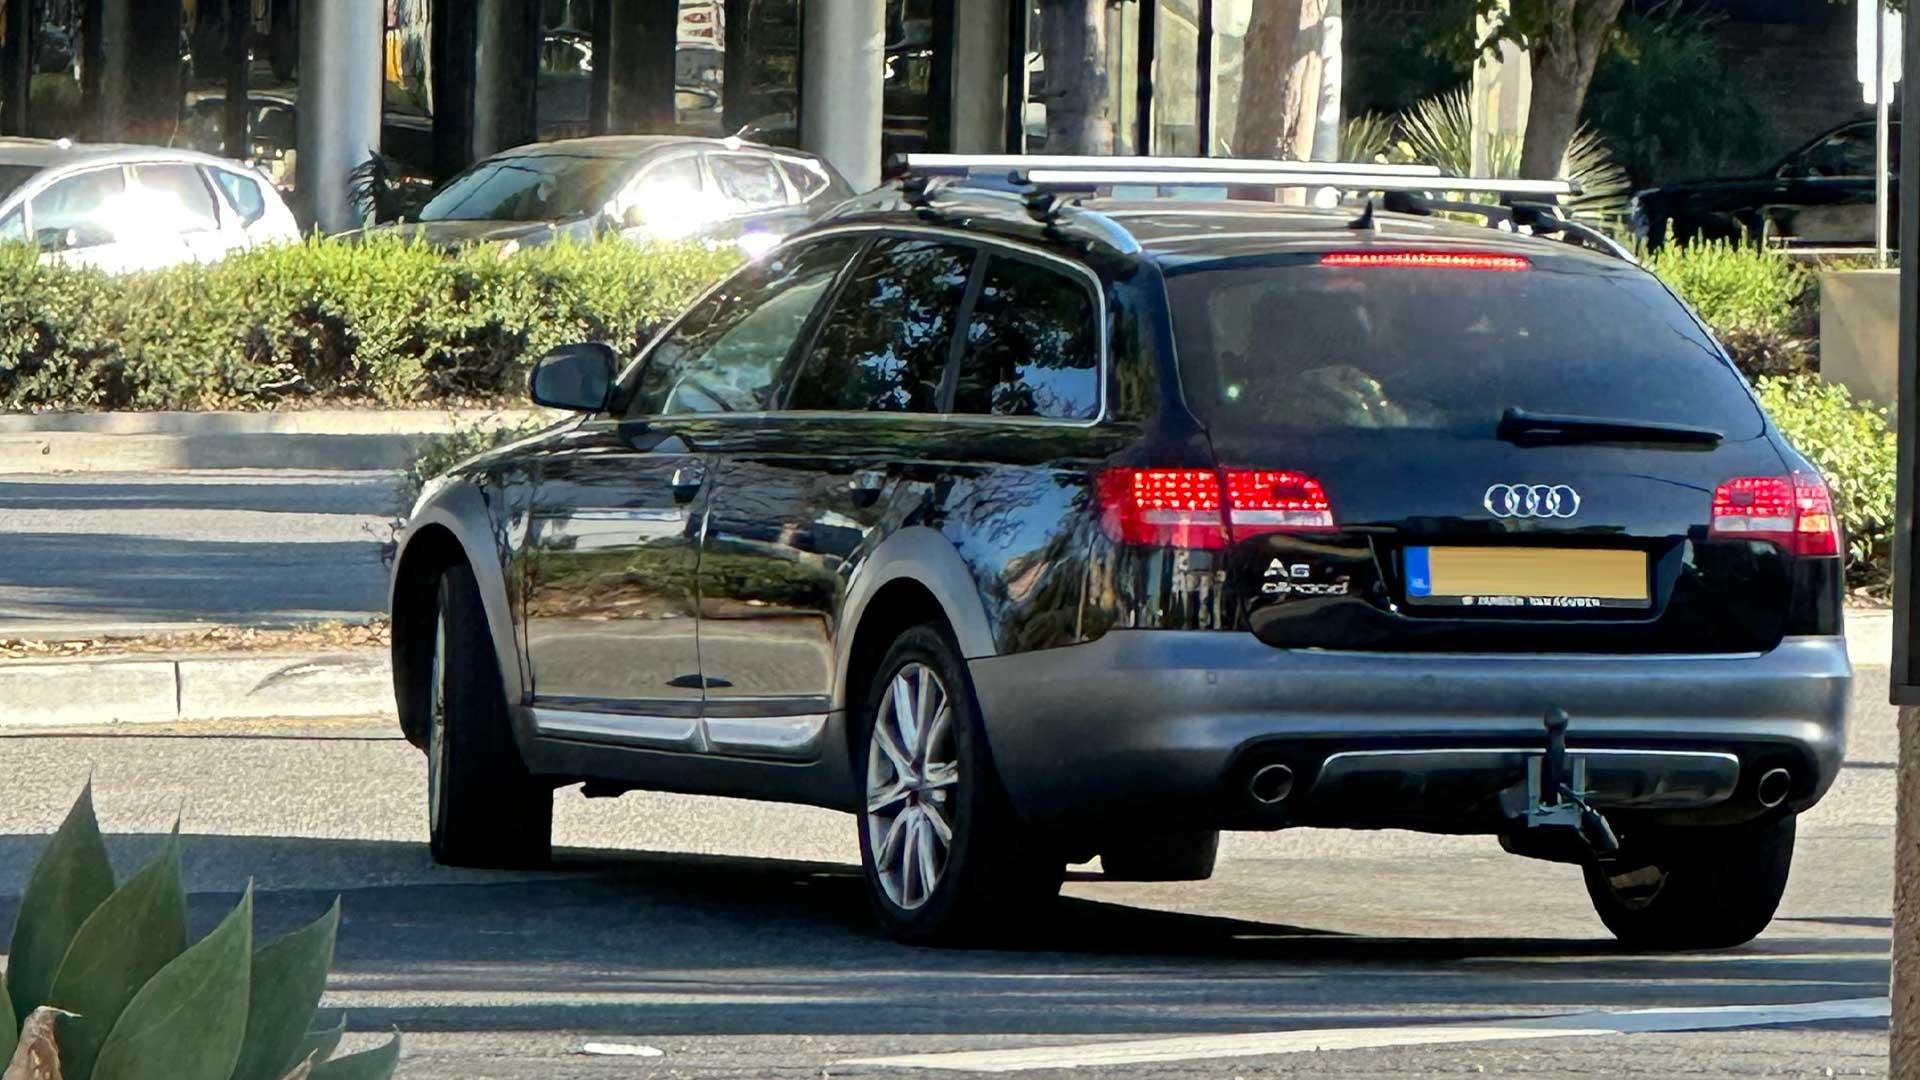 What is this Dutch Audi A6 Allroad TDI doing in America?